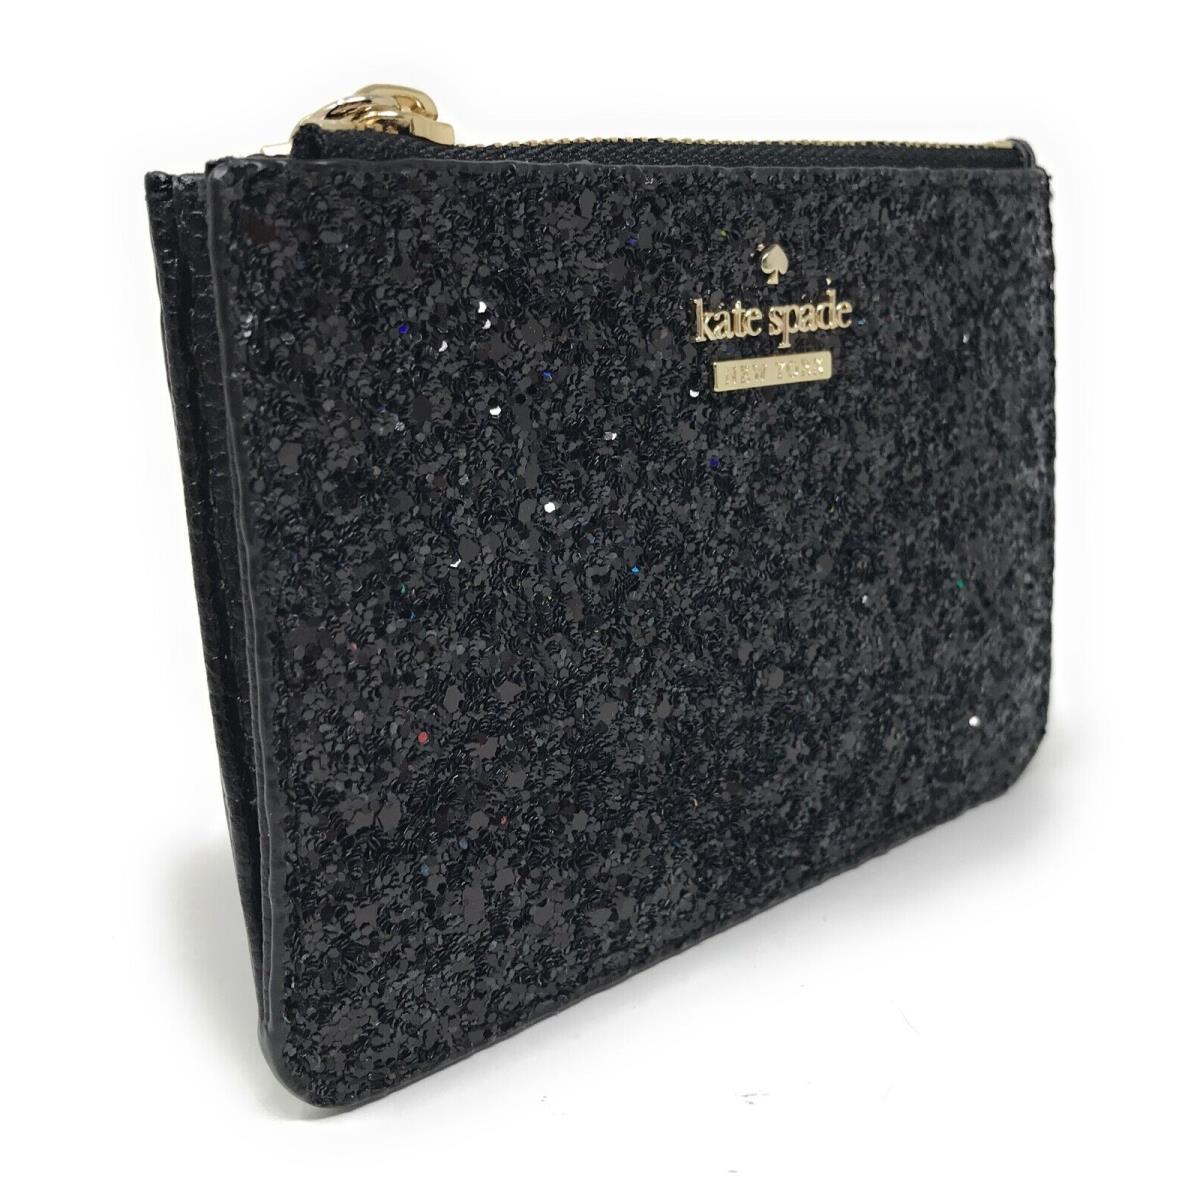 Kate Spade New York Laurel Way Bitsy Black Glitter Coin Pouch